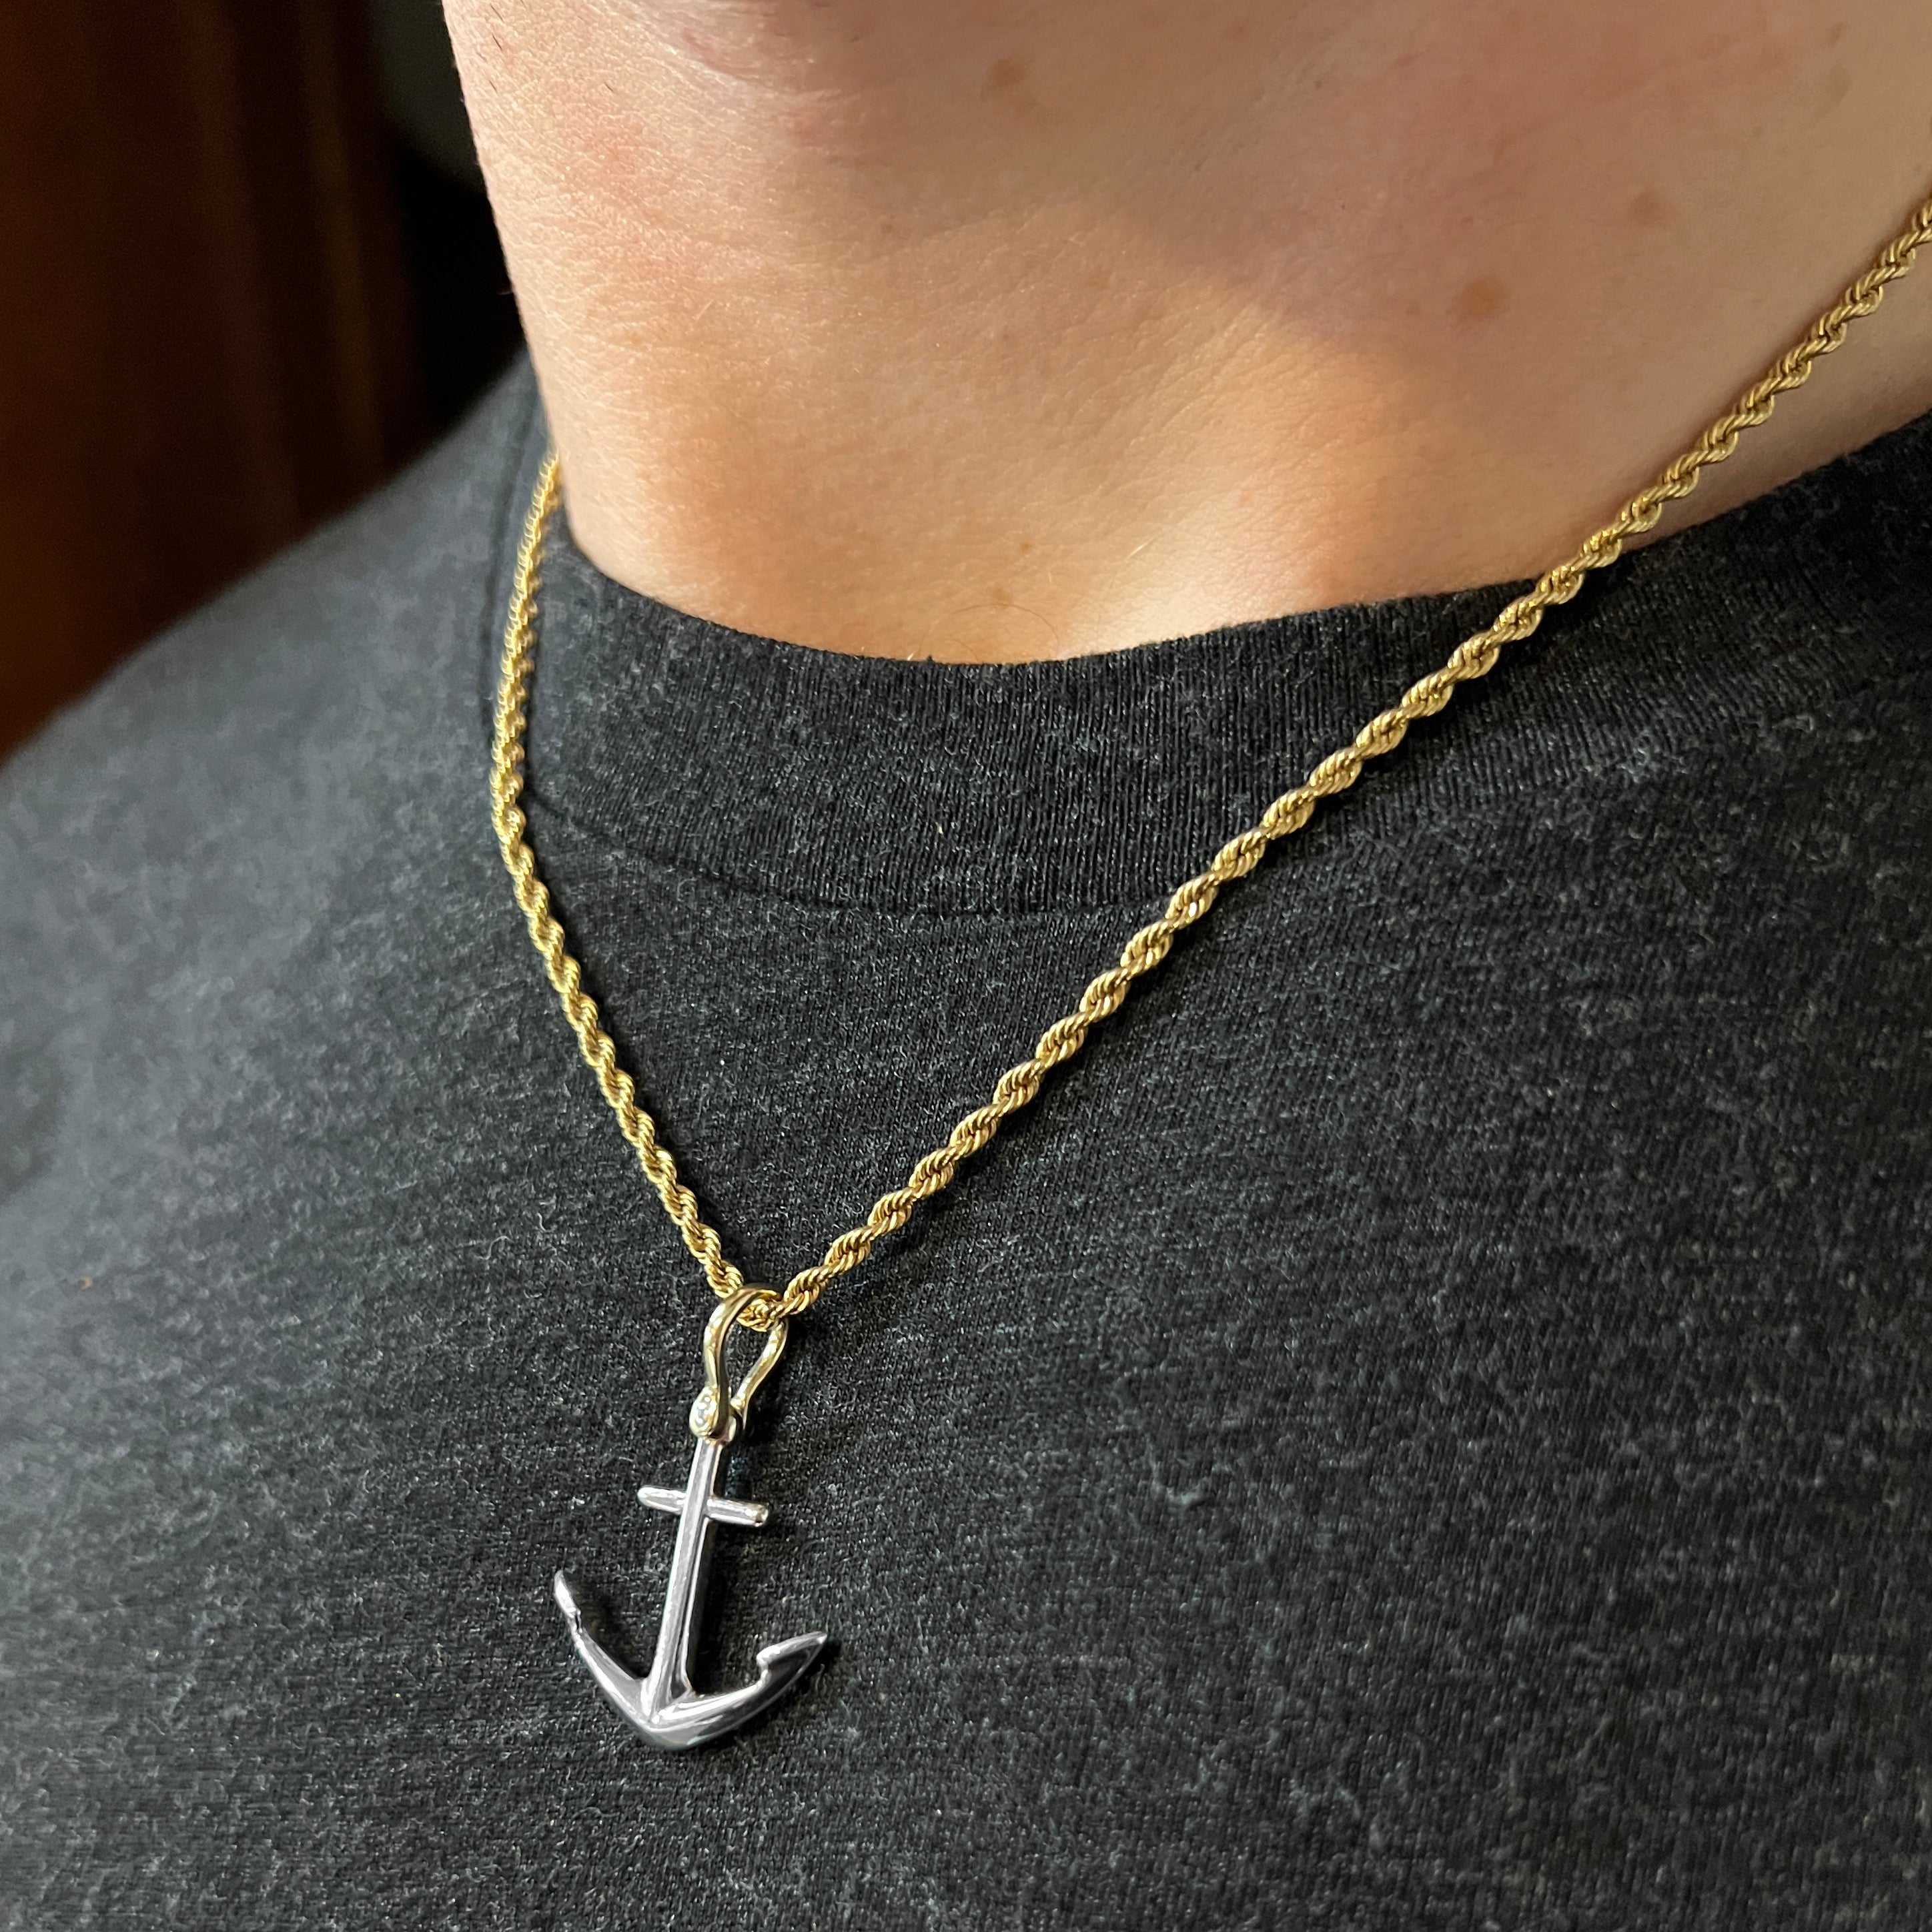 Buy Baronyka Handmade Anchor Pendant Necklace for Men, Bronze-Plated, Mens  Anchor Necklace, 24